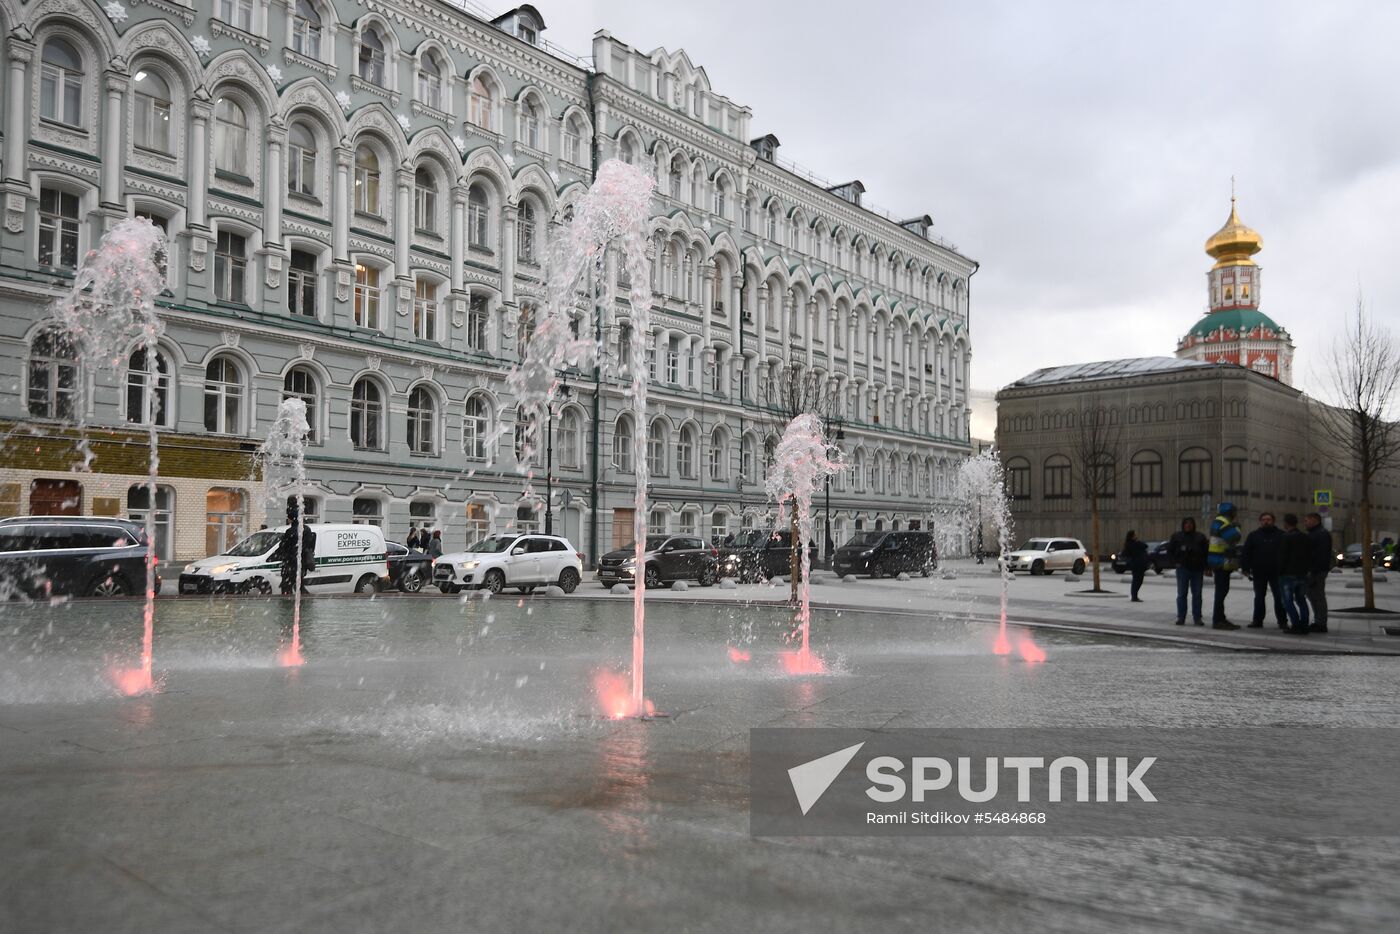 Fountain season opens in Moscow